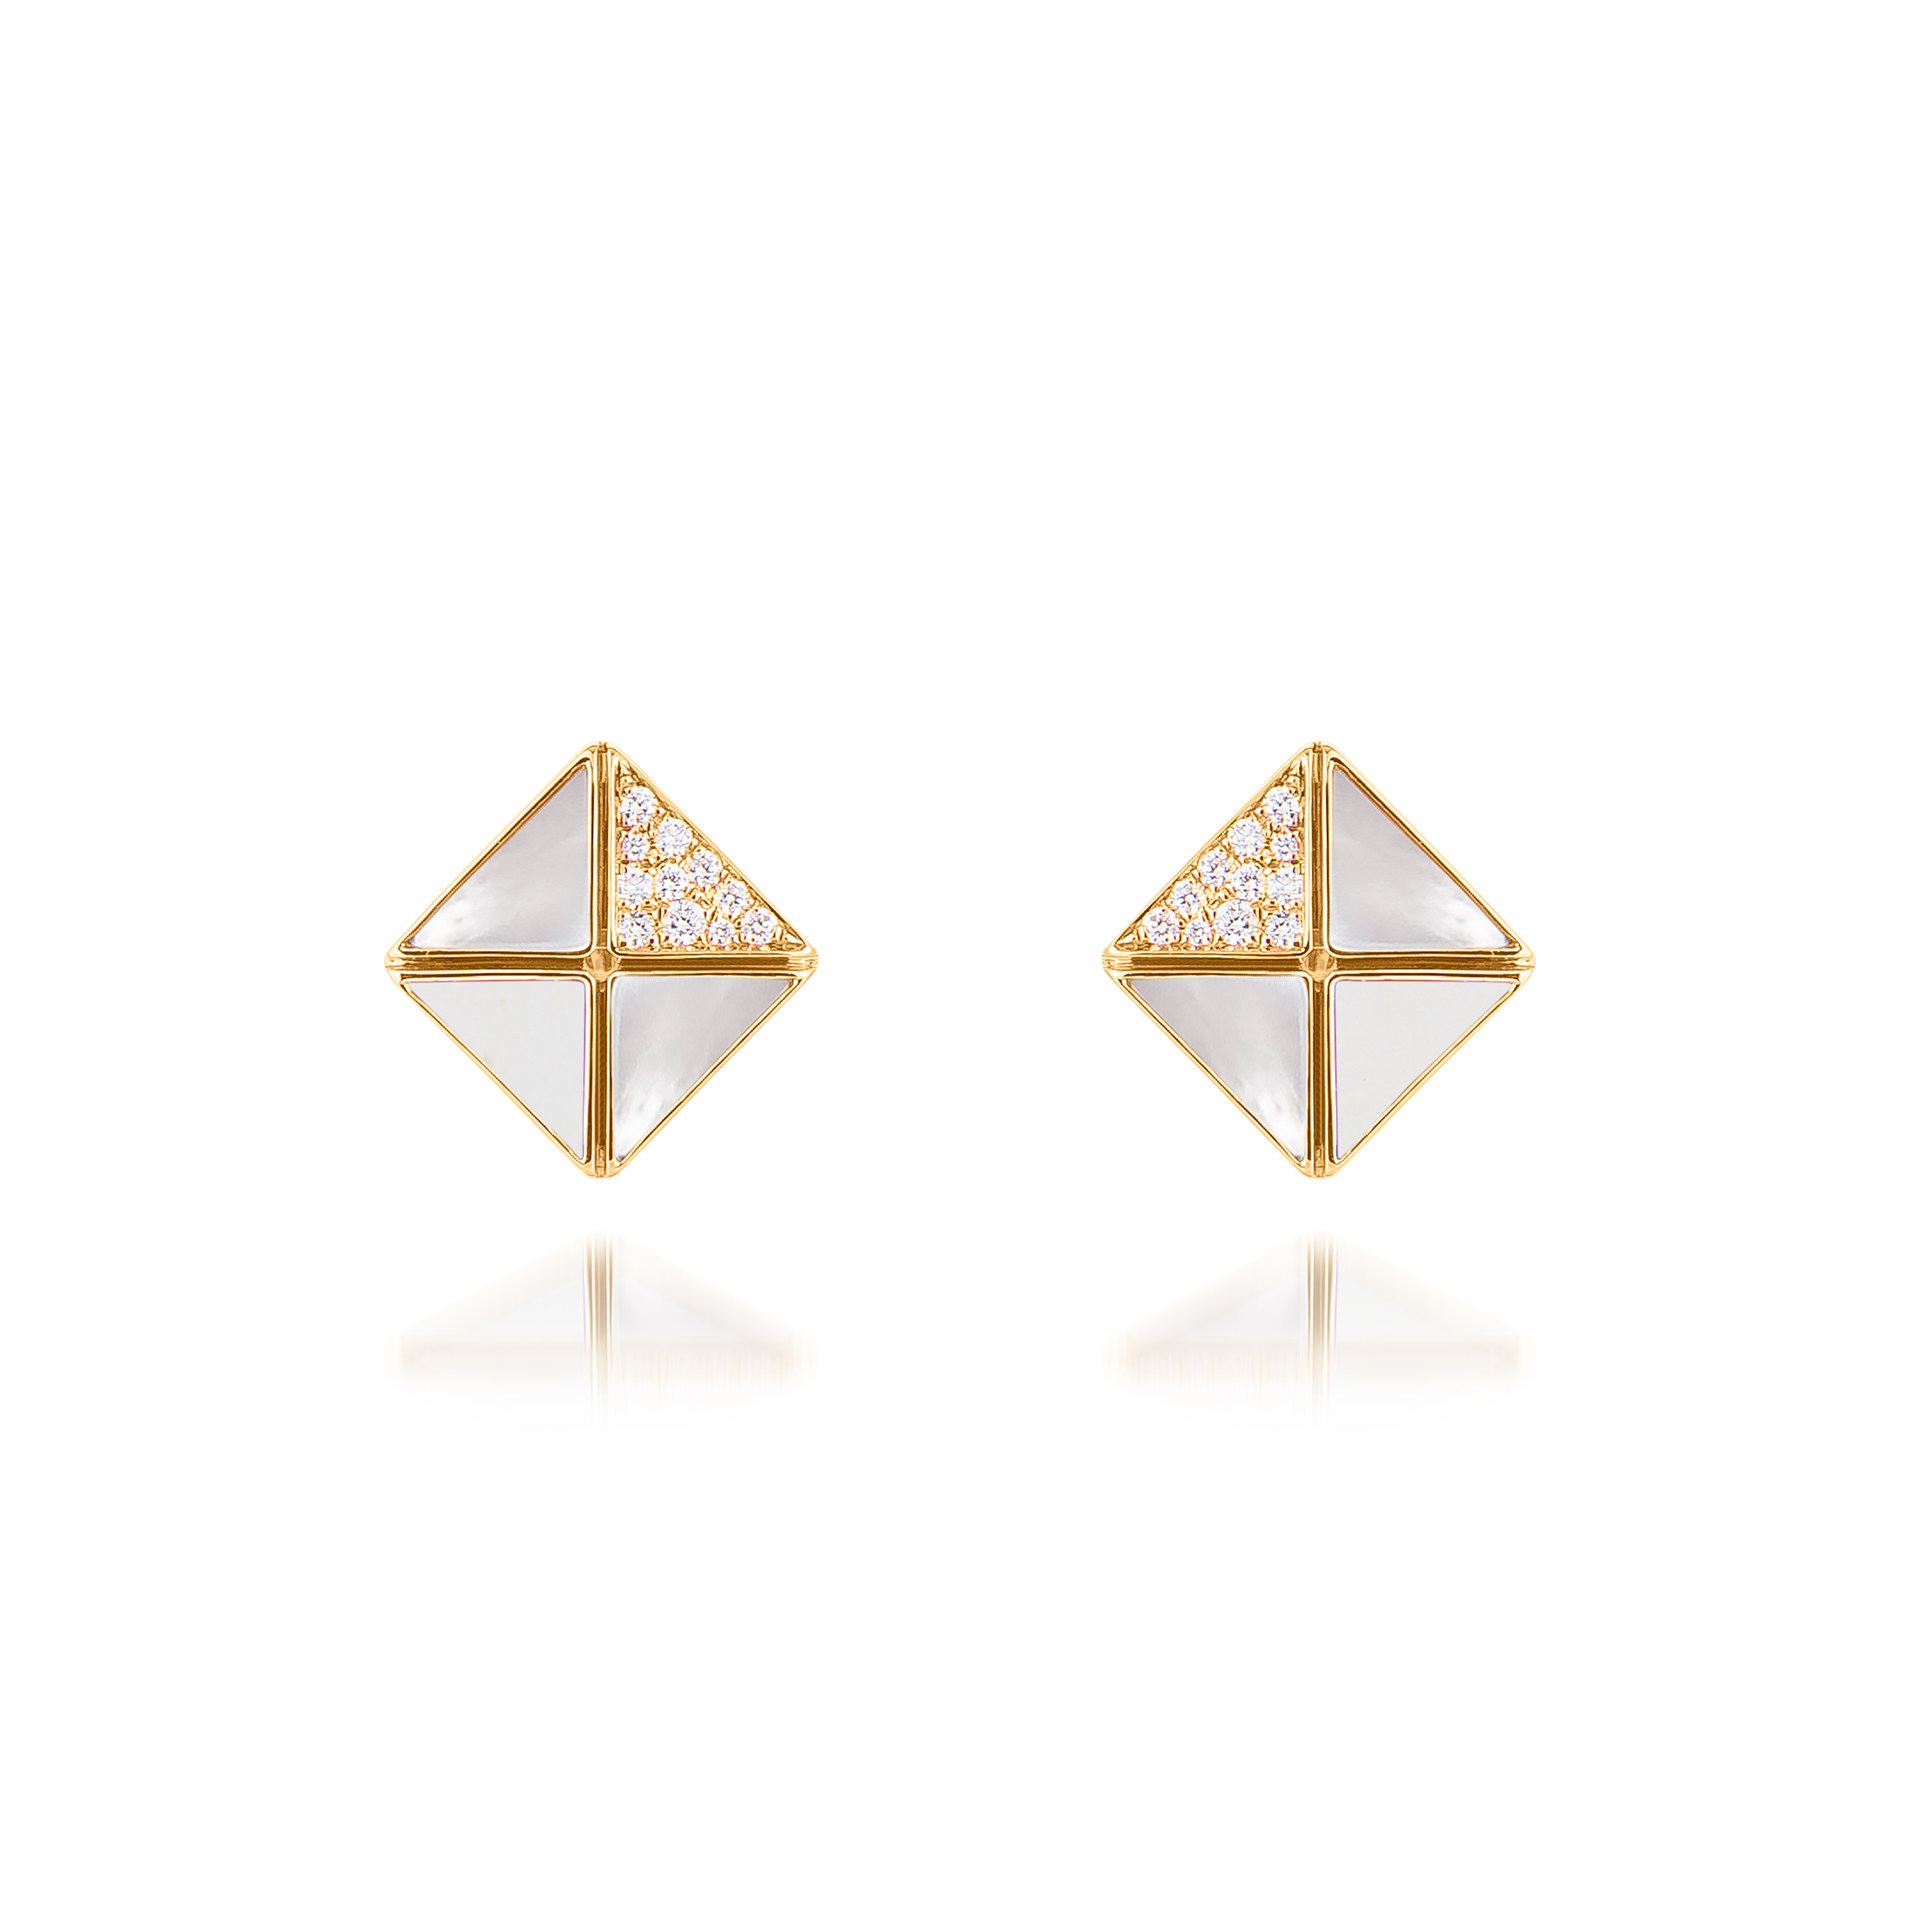 Deco Quadratic Studs with White Agate, White Mother of Pearl and Diamonds  In 18K Yellow Gold